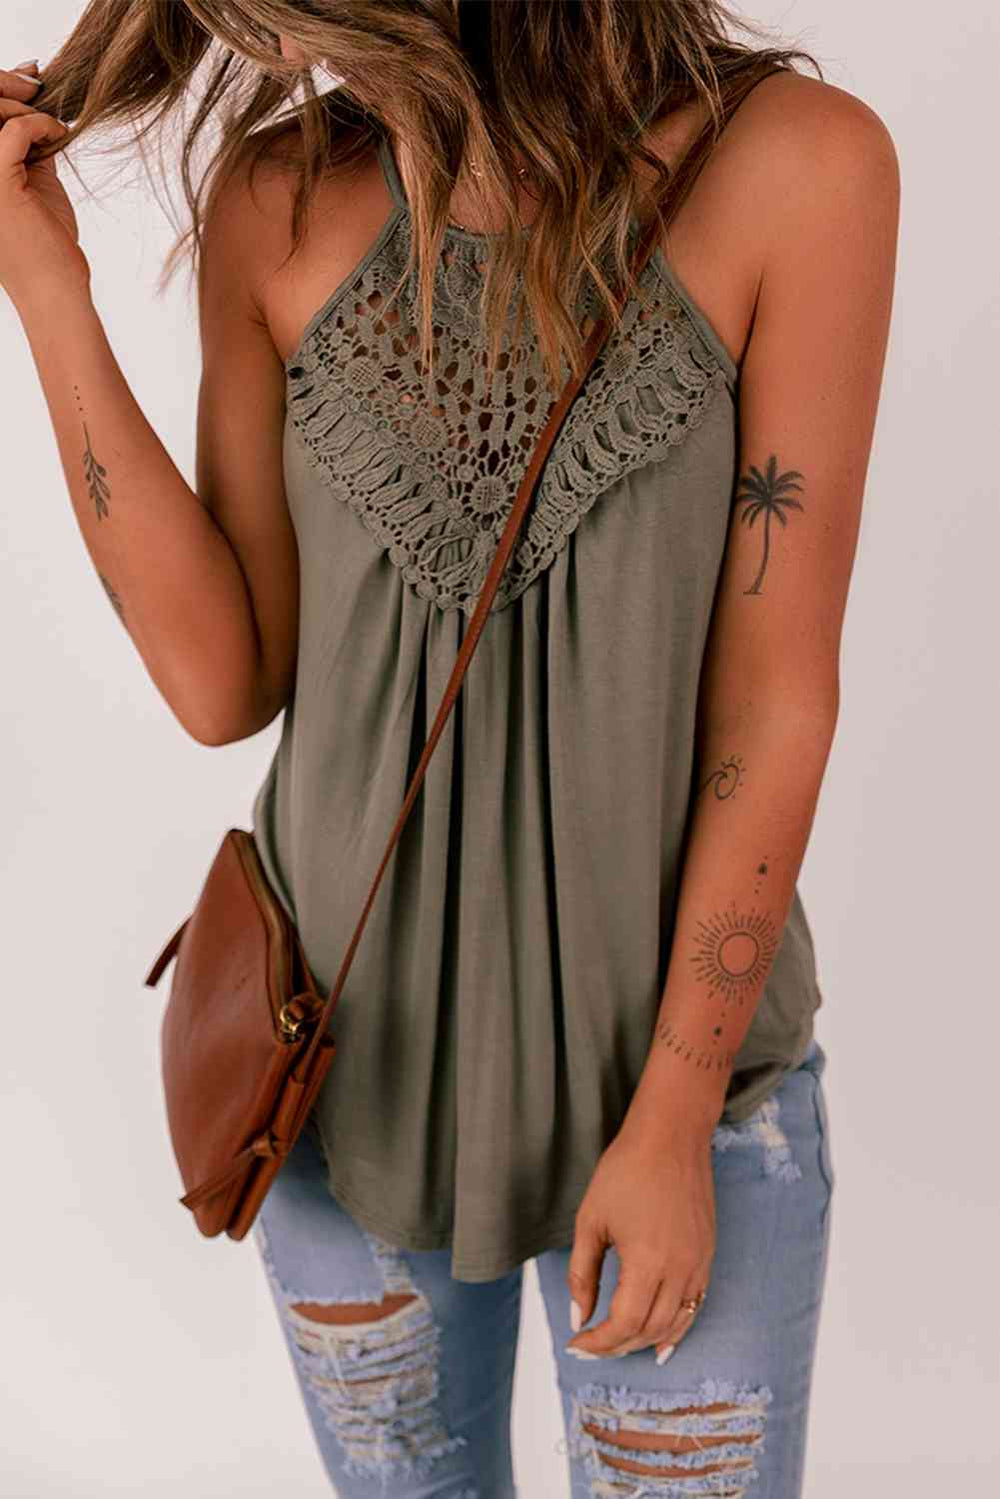 The802Gypsy shirts and tops GYPSY-Crochet Lace Detail Tank Top